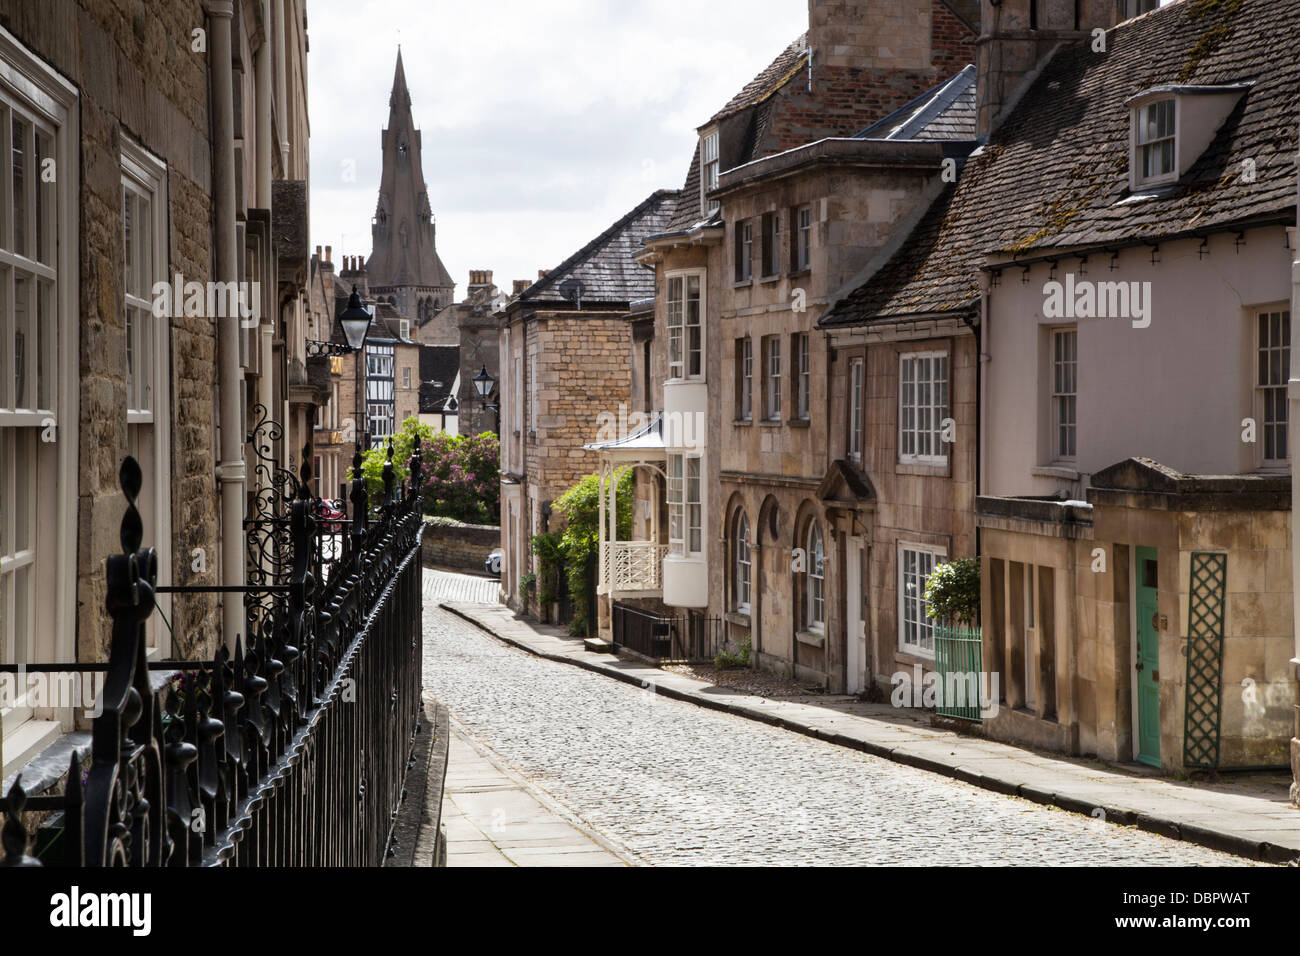 The quintessential cobbled street and Georgian architecture of Barn Hill with St Mary's church in the background, Stamford, Lincolnshire, England Stock Photo